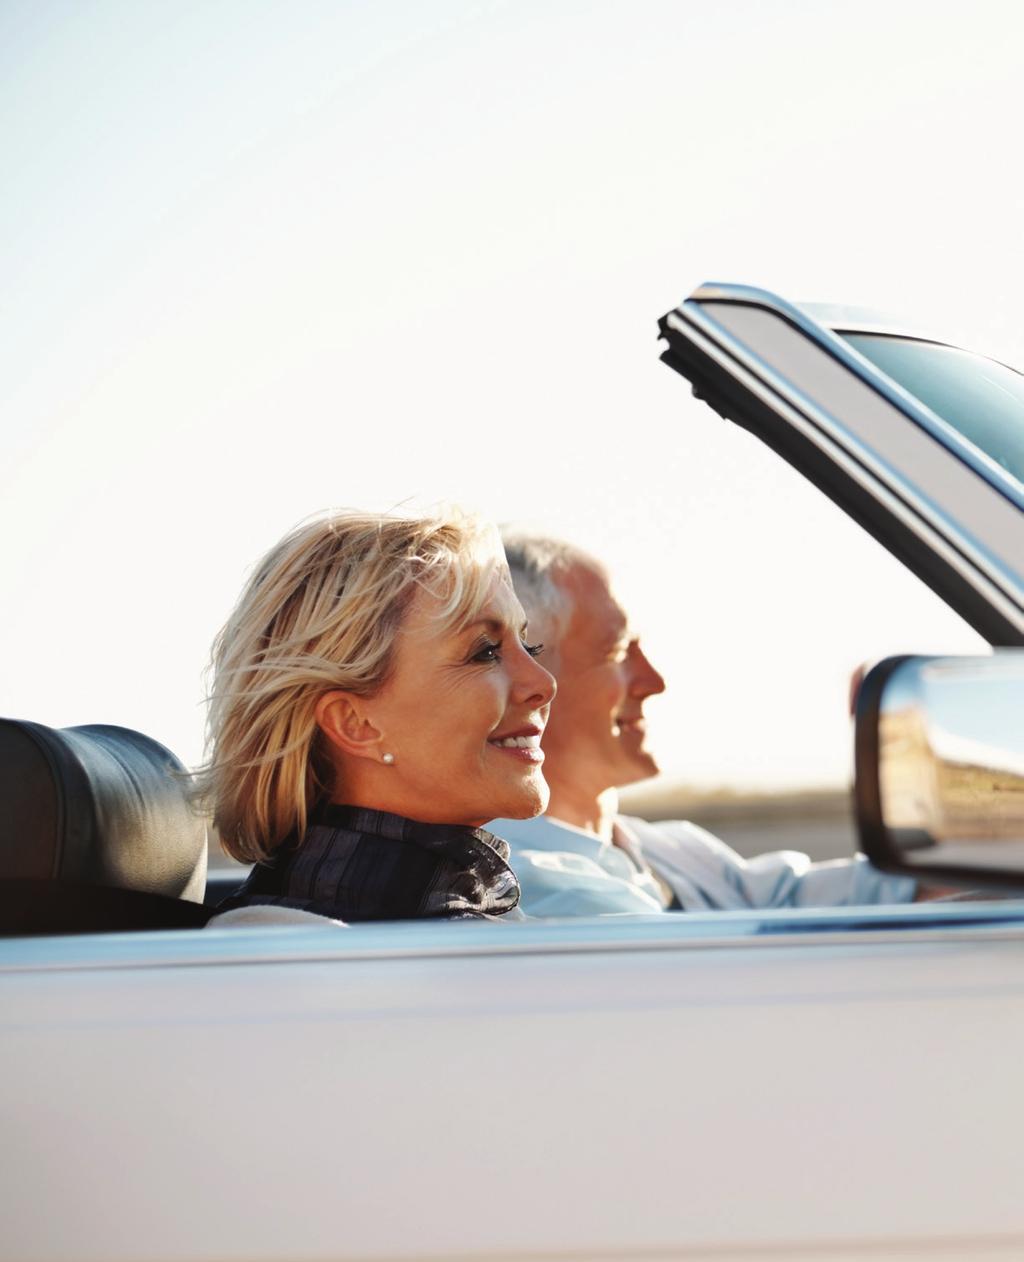 What to expect when renewing your driver s licence. Starting at age 80, Ontario drivers must complete a group education course and pass a vision test every two years.